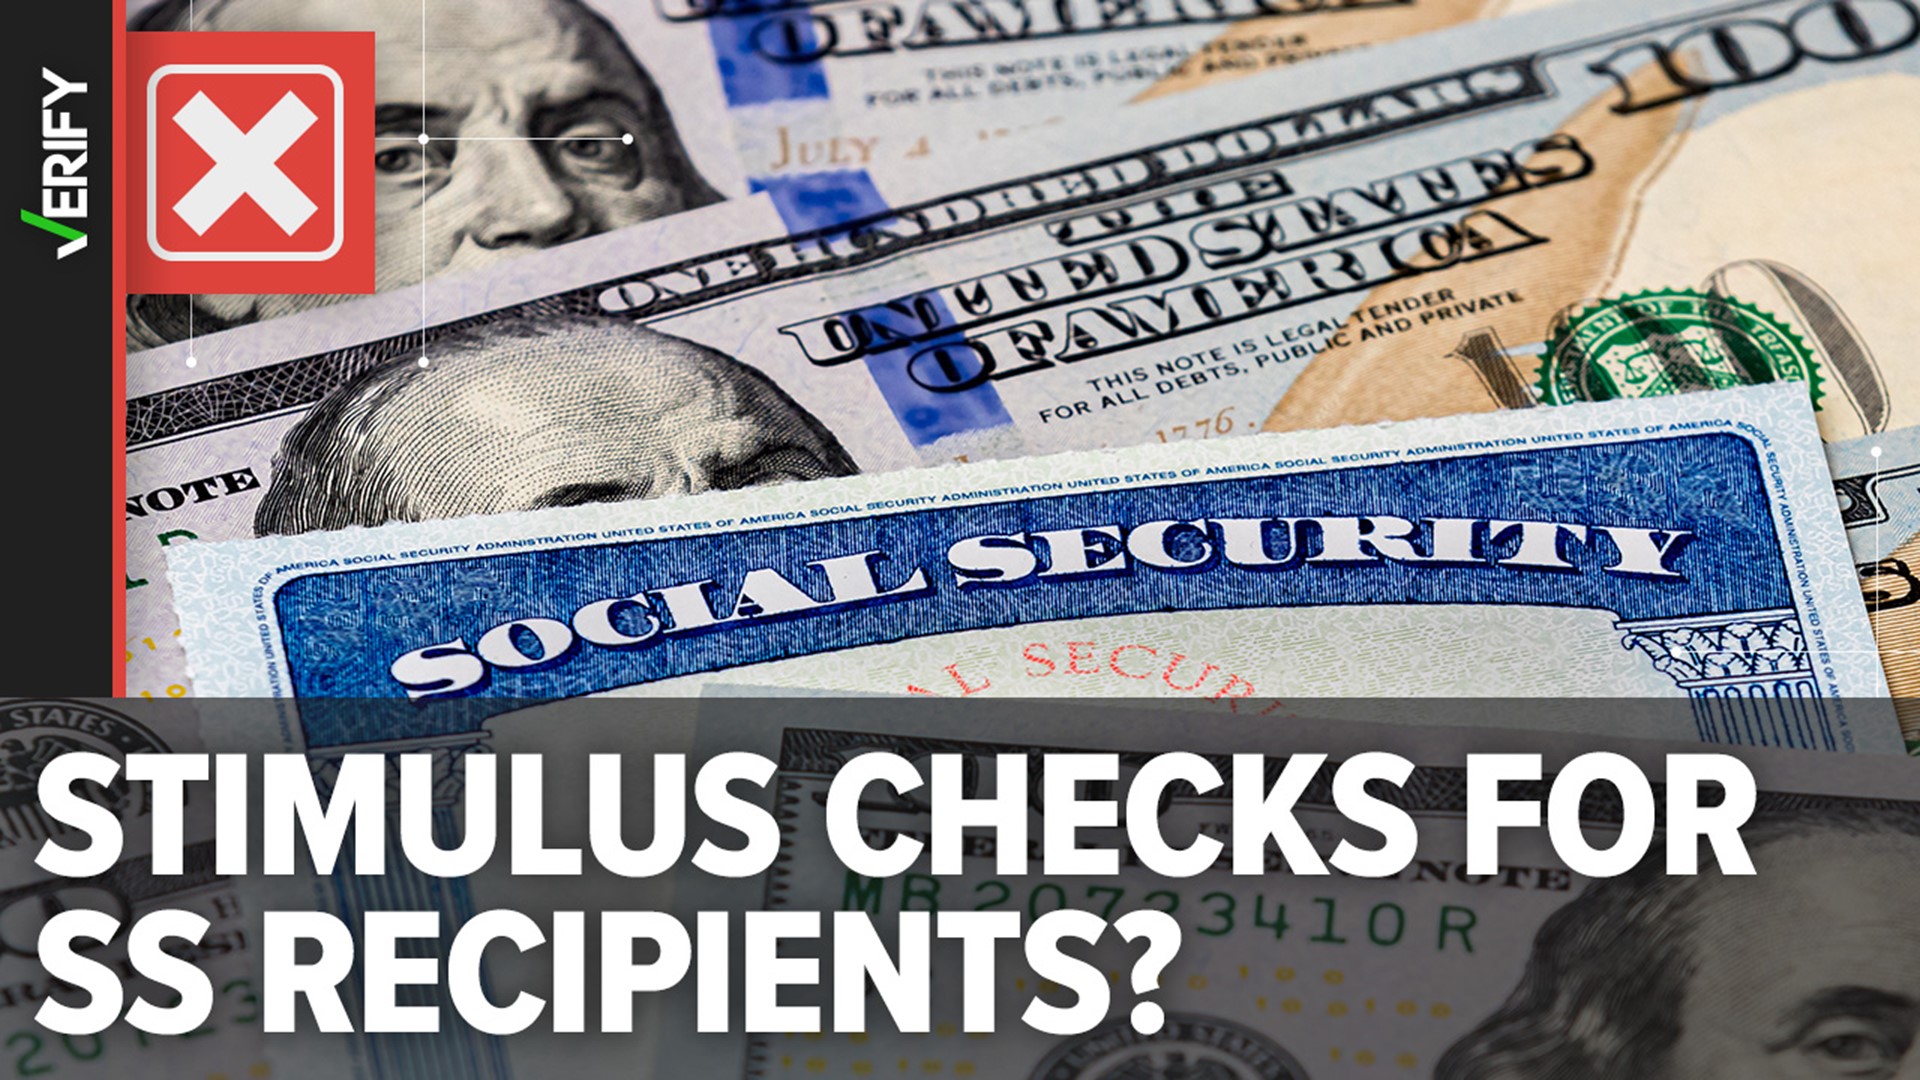 AI-generated content is likely behind at least some of the false online rumors about another round of stimulus checks for Social Security recipients.